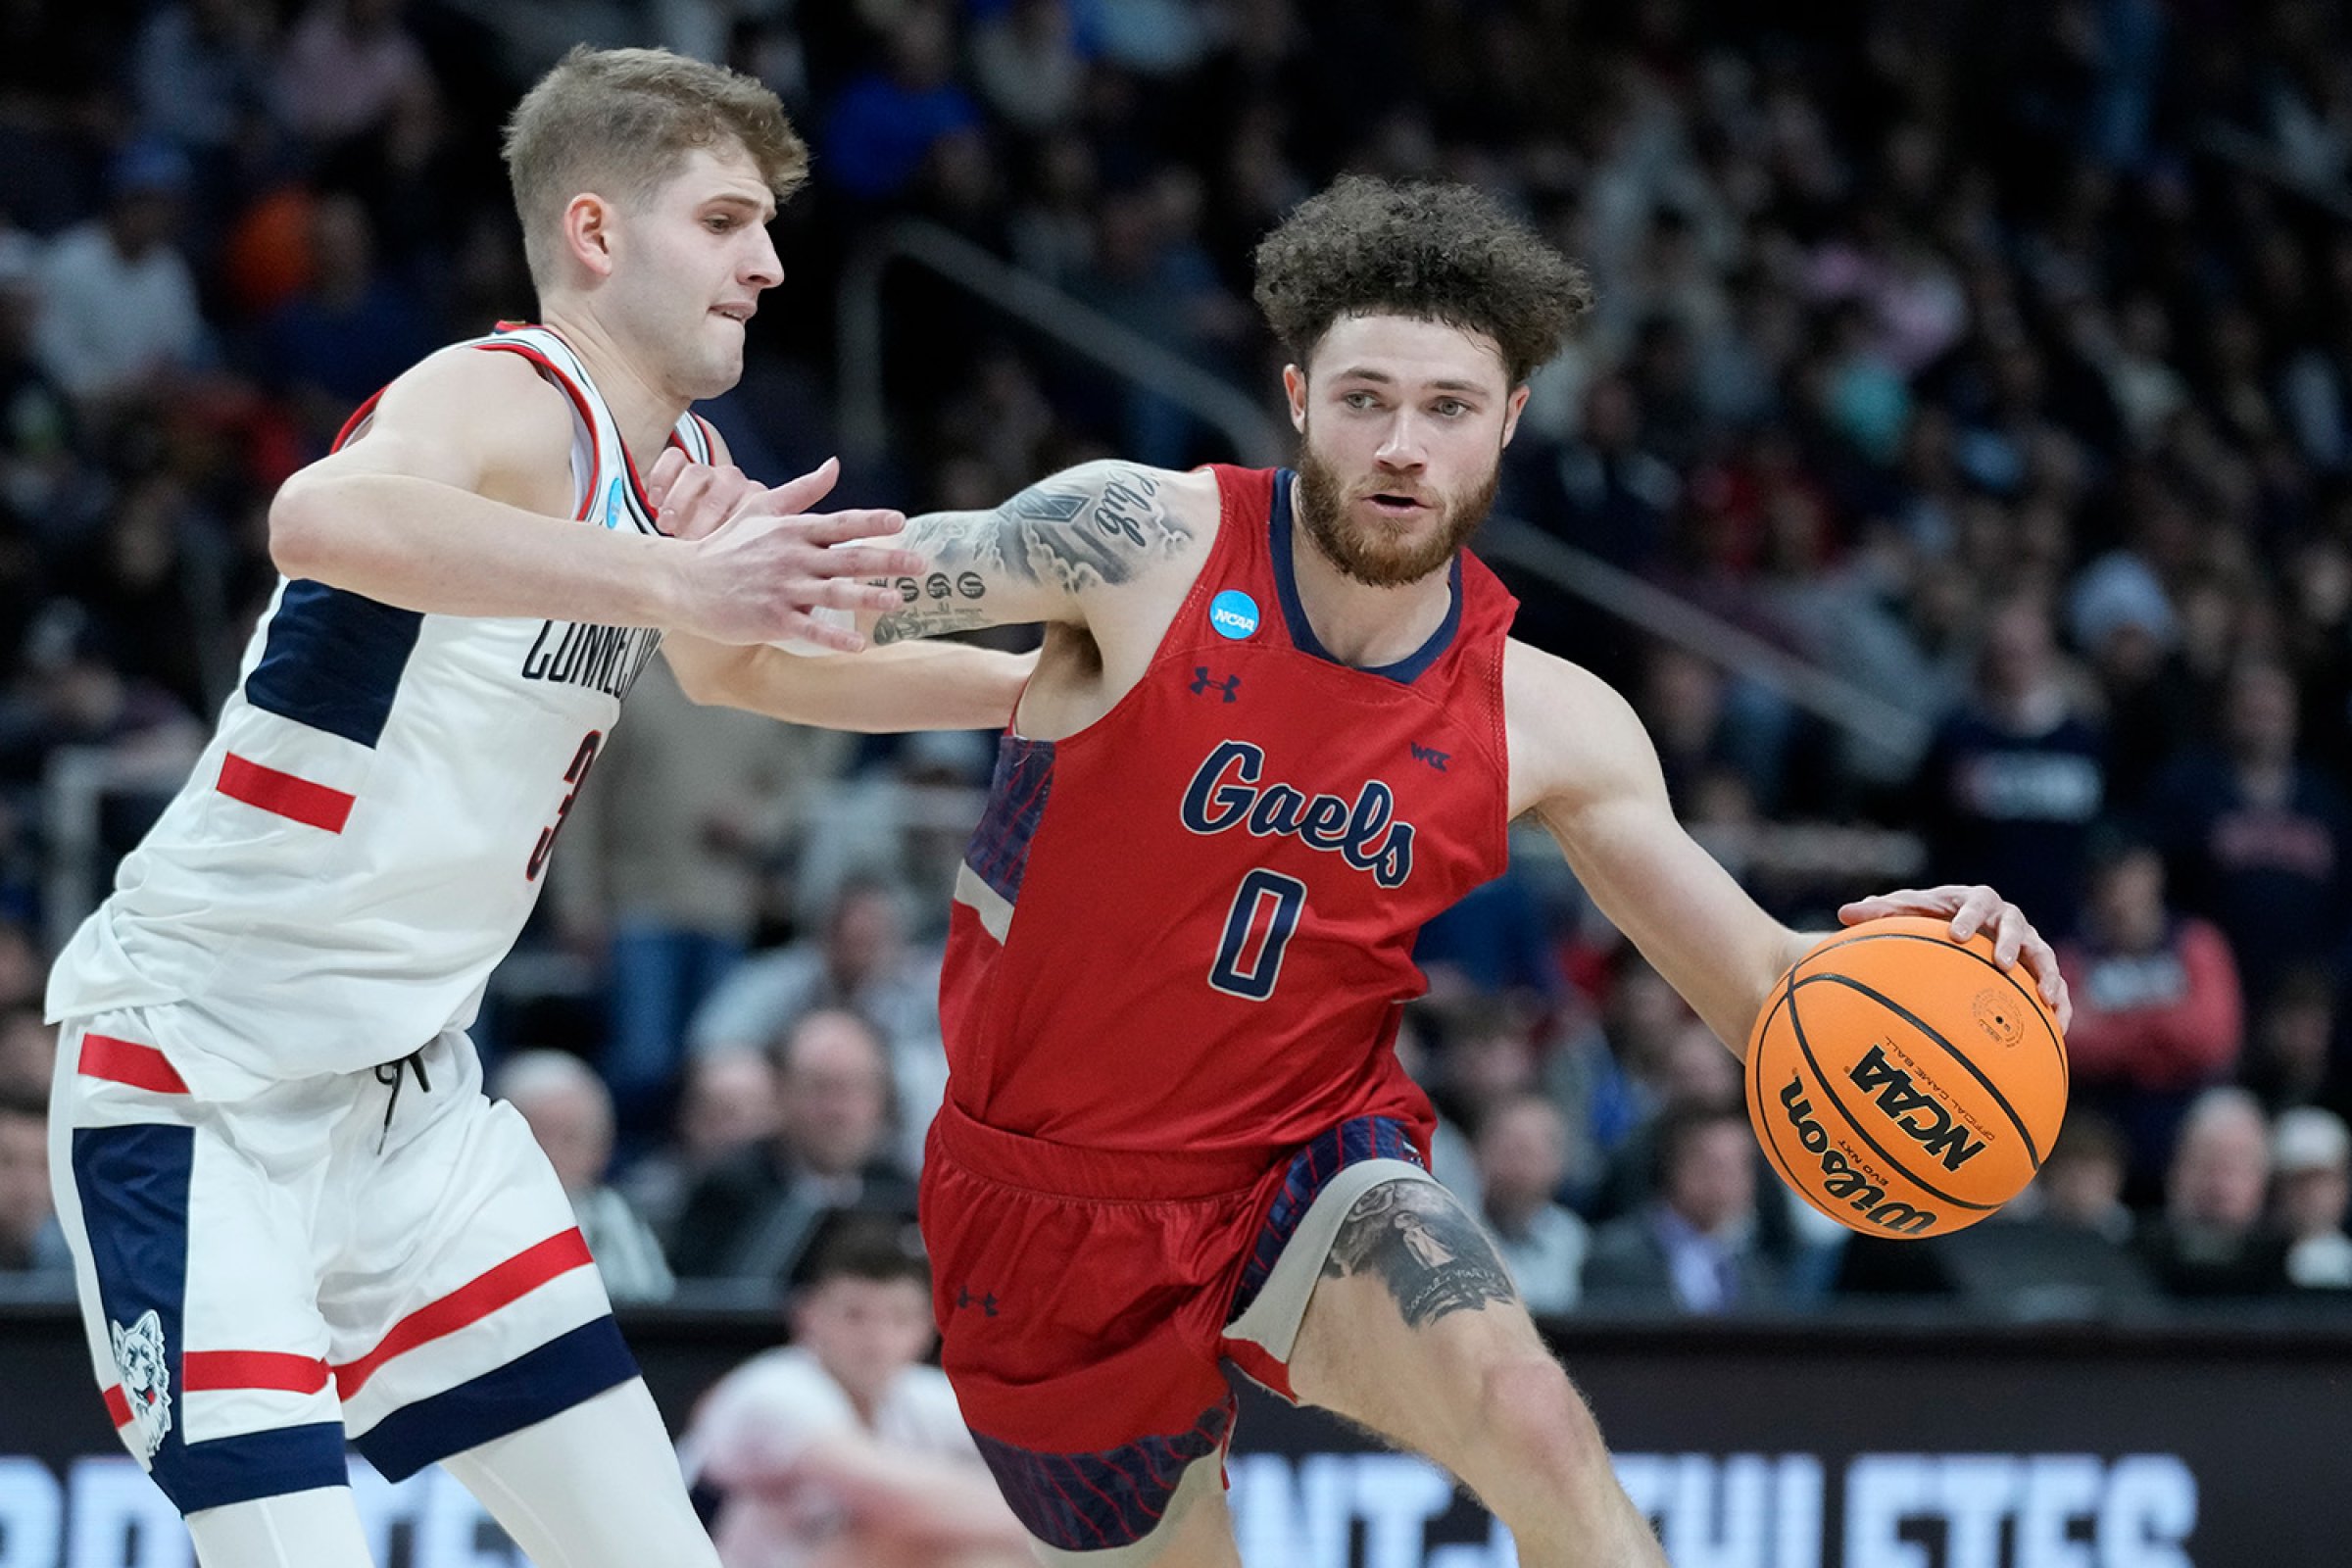 SMC basketball player Logan Johnson drives against University of Connecticut in NCAA Tournament on March 19, 2023